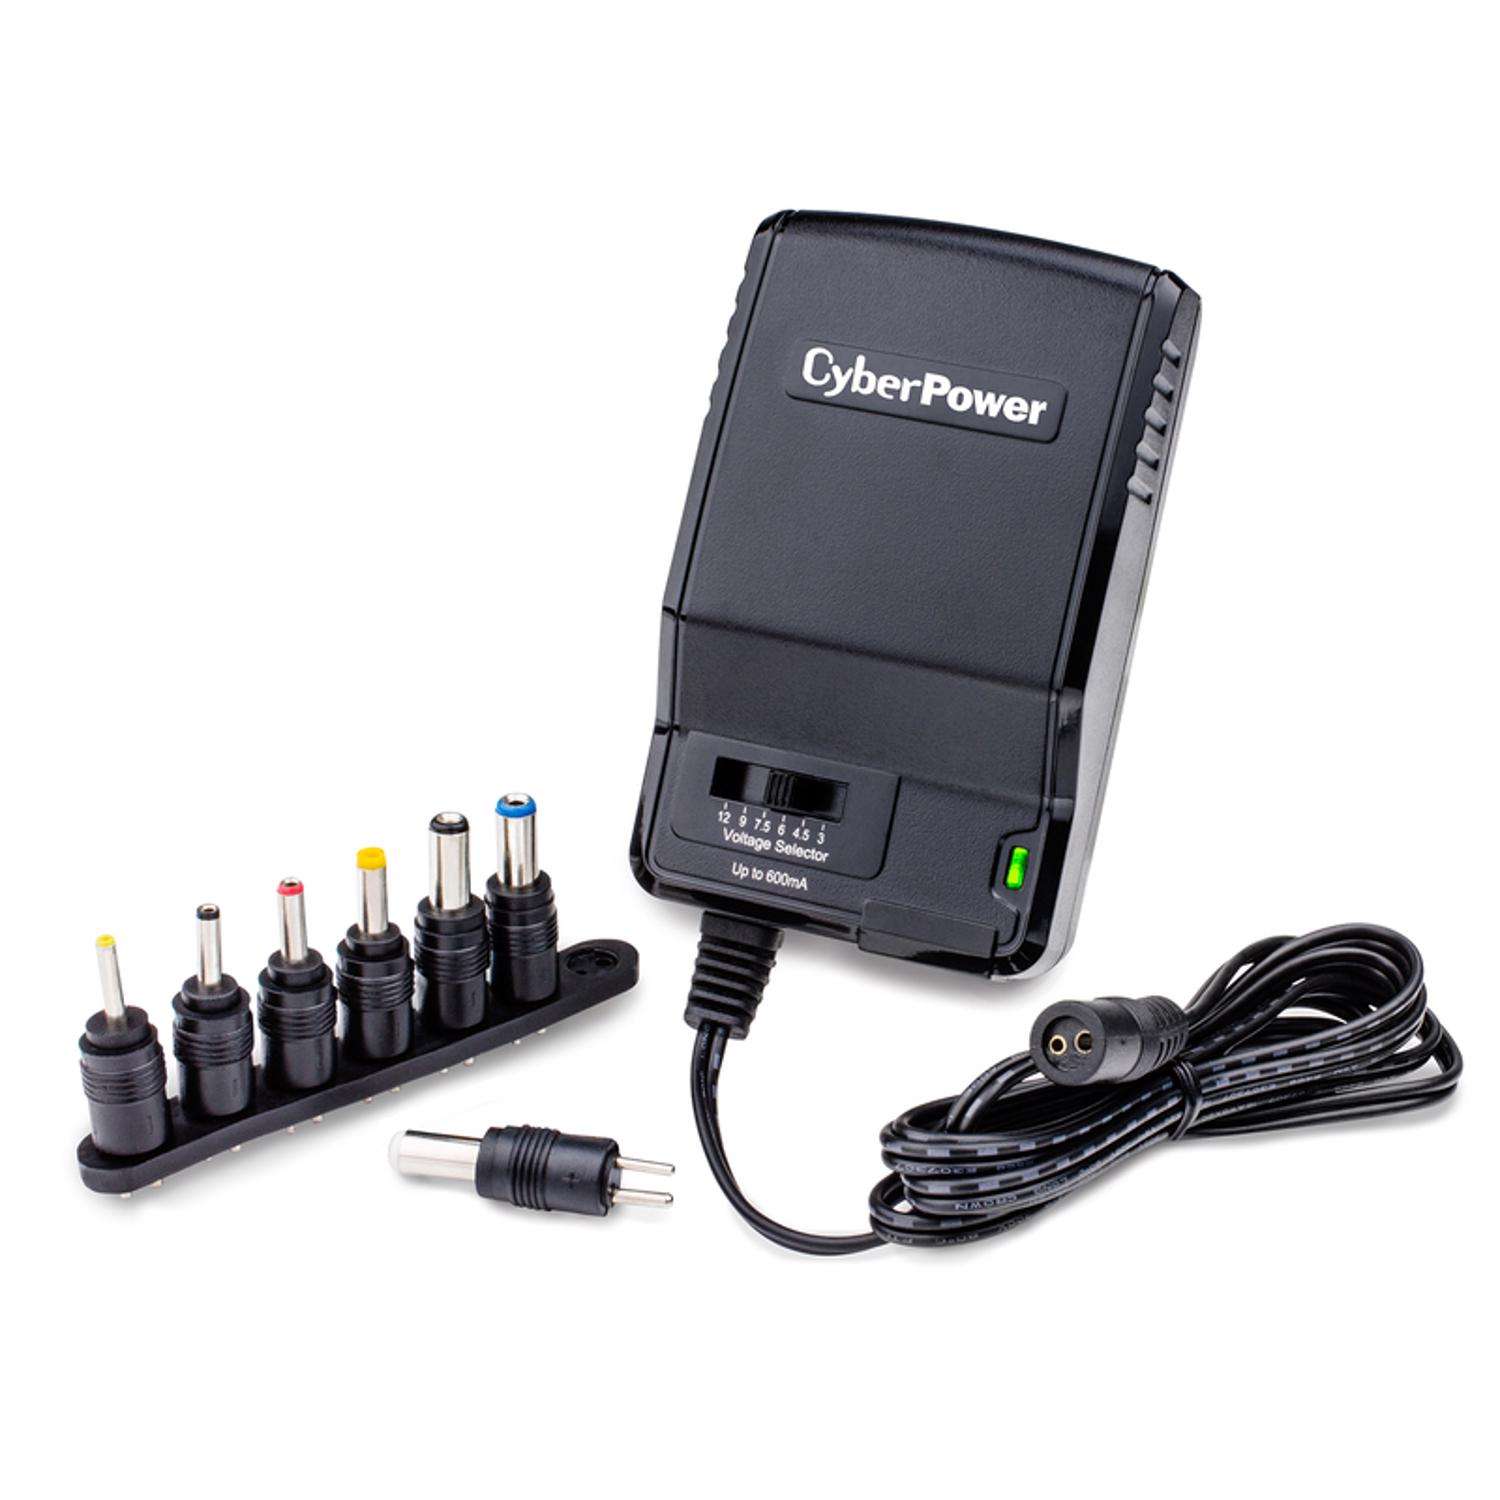 CyberPower - Universal Power Adapter 600mA - Cpuac600